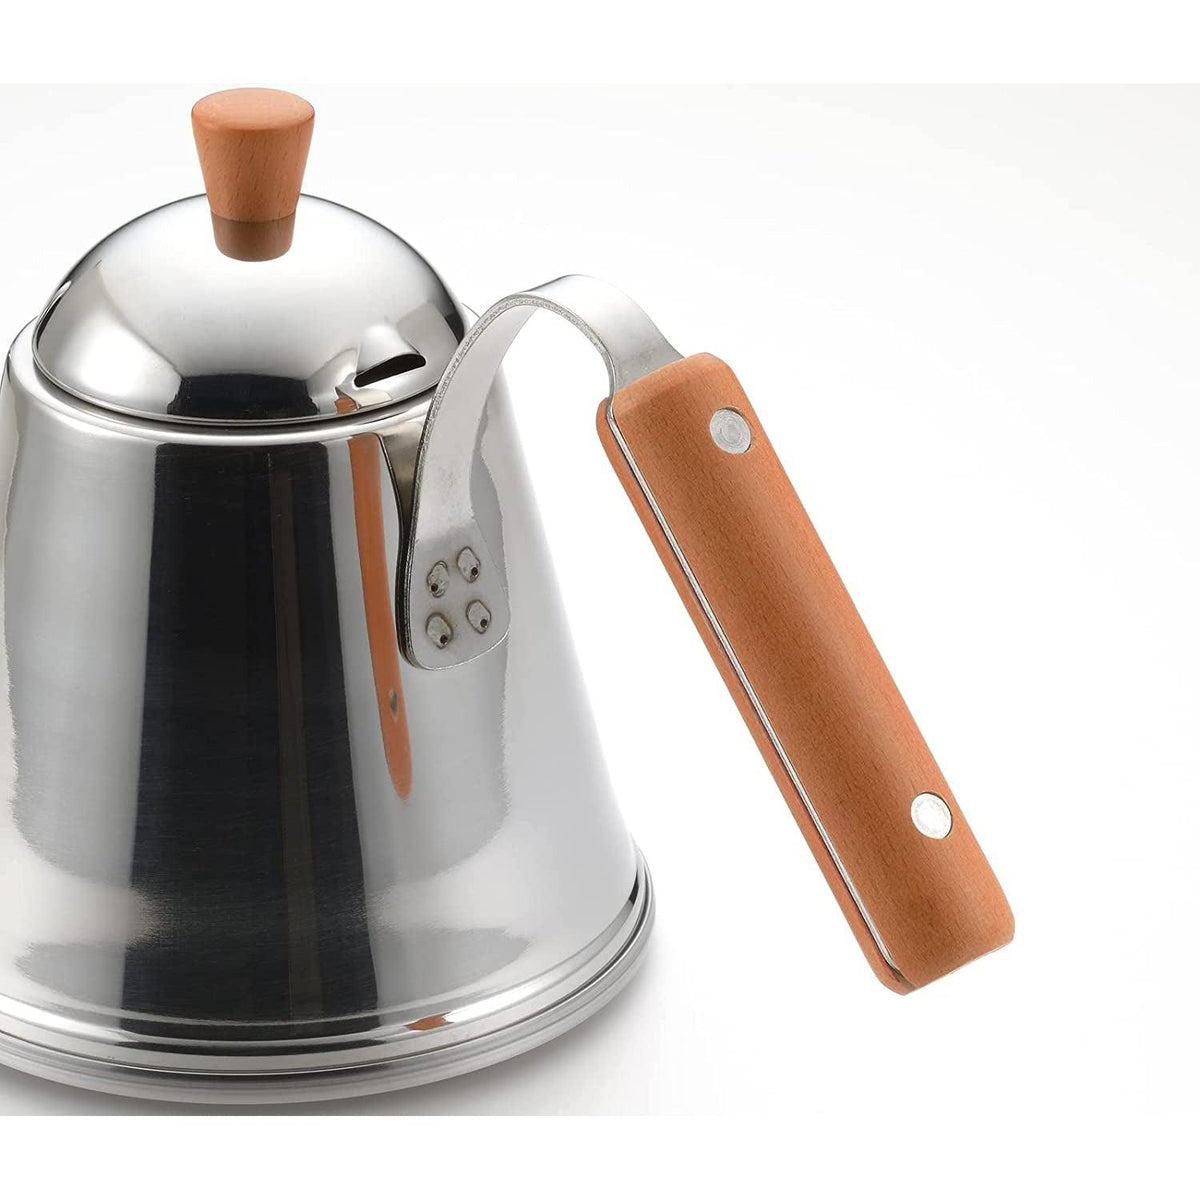 Ch-ih Japanese Pour Over Coffee and Tea Kettle Drip Pot 1.2 Liter 6 Cups